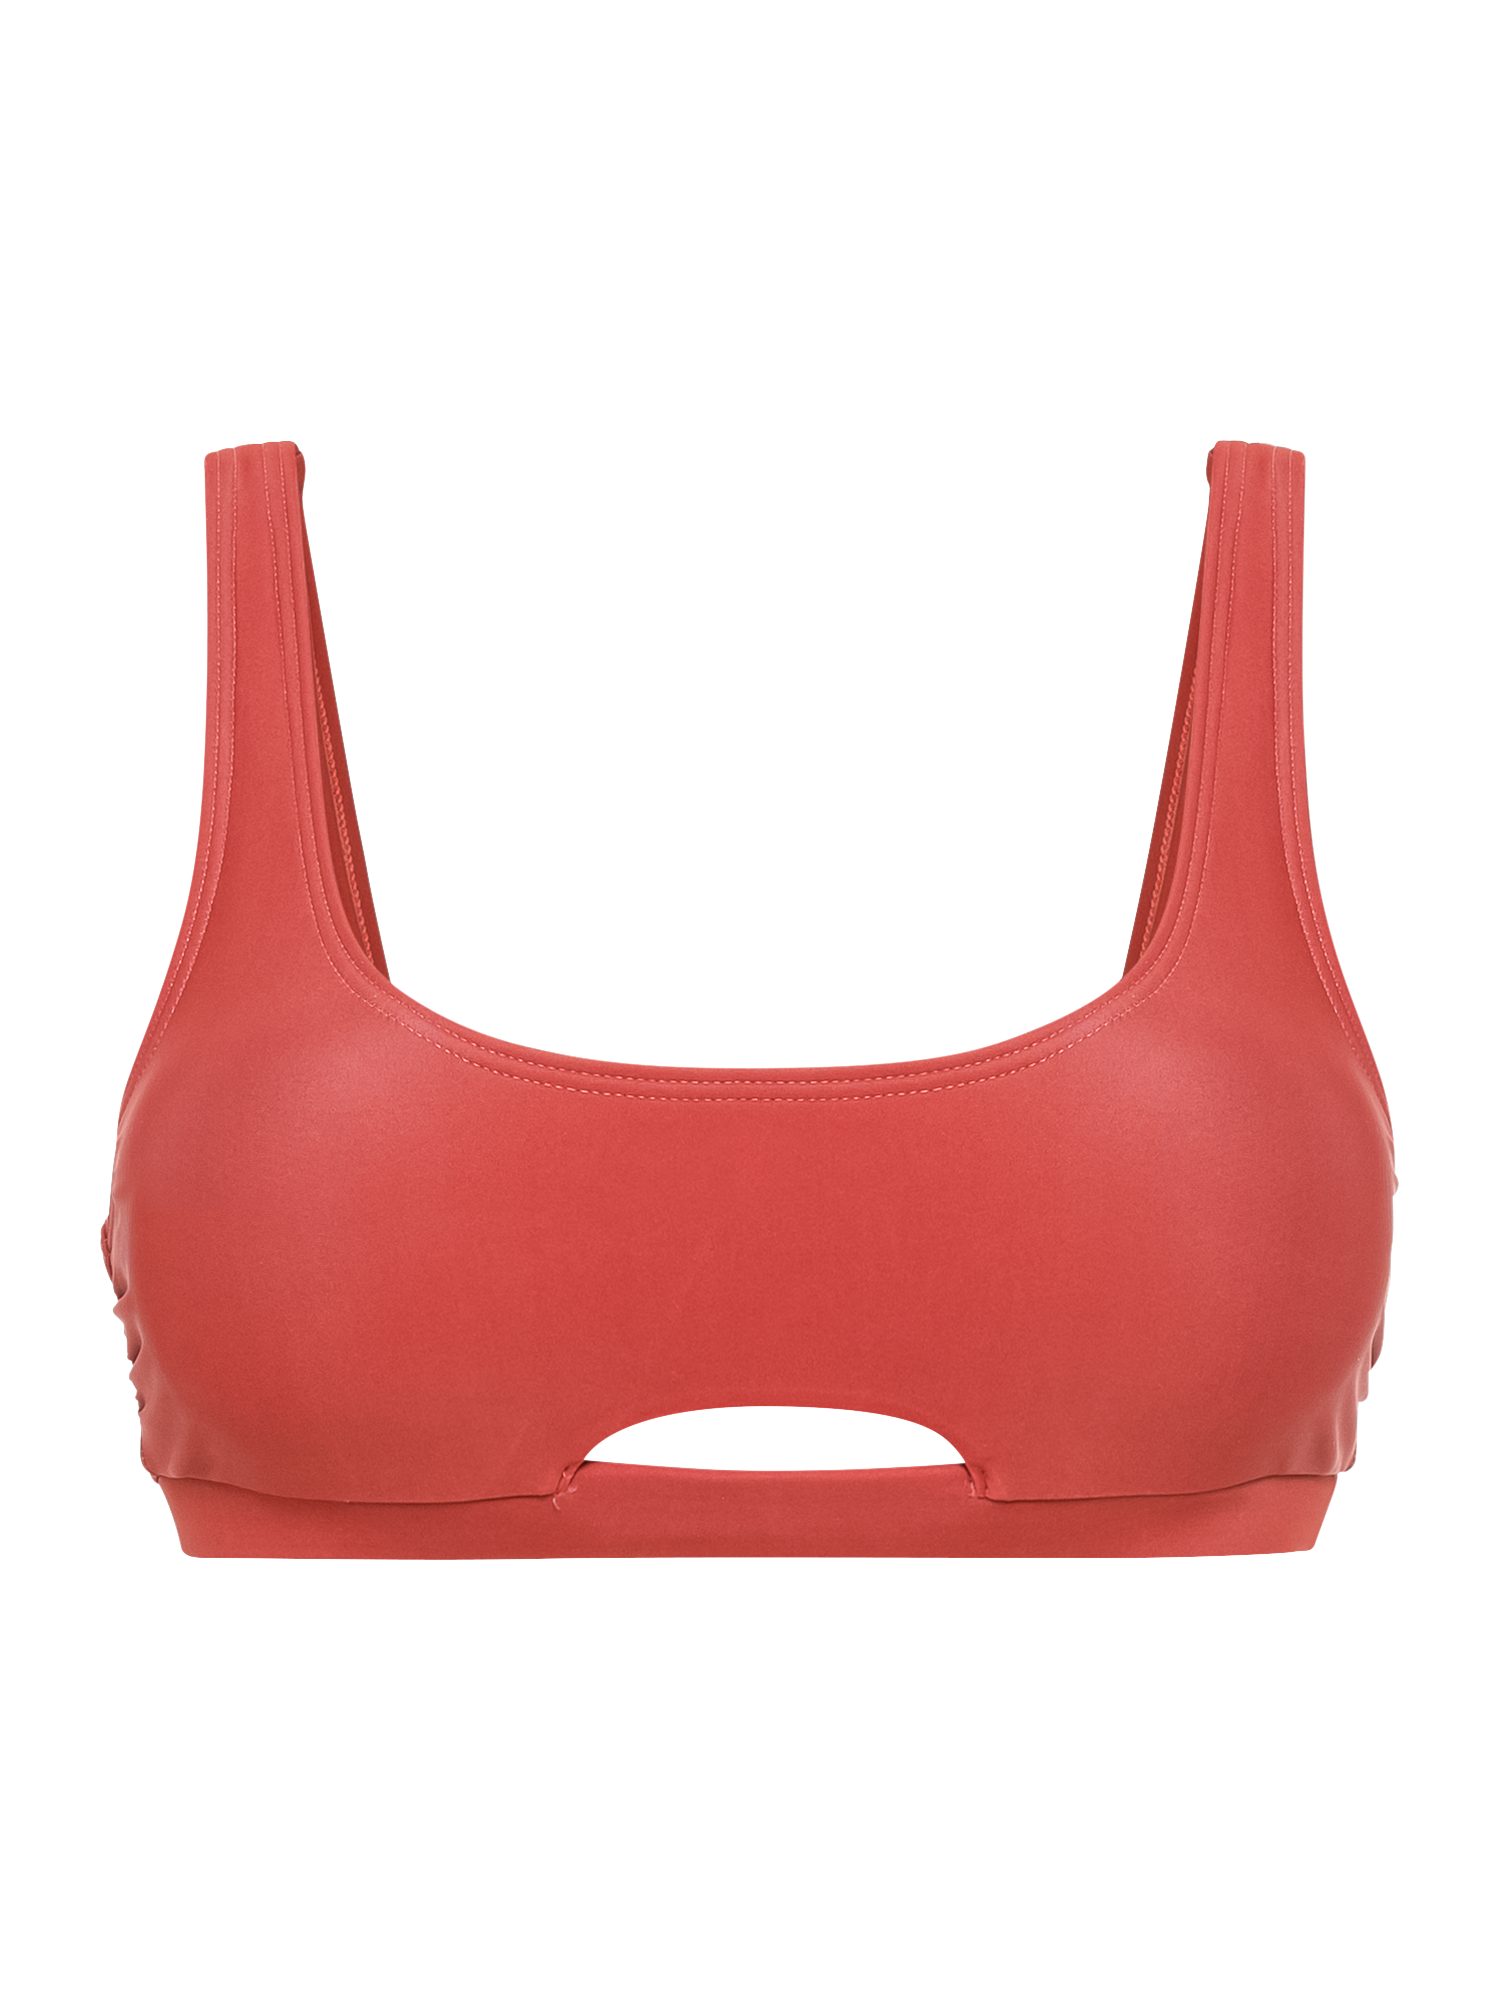 lscn by lascana bustierbikinitop gina met cut-out voor rood